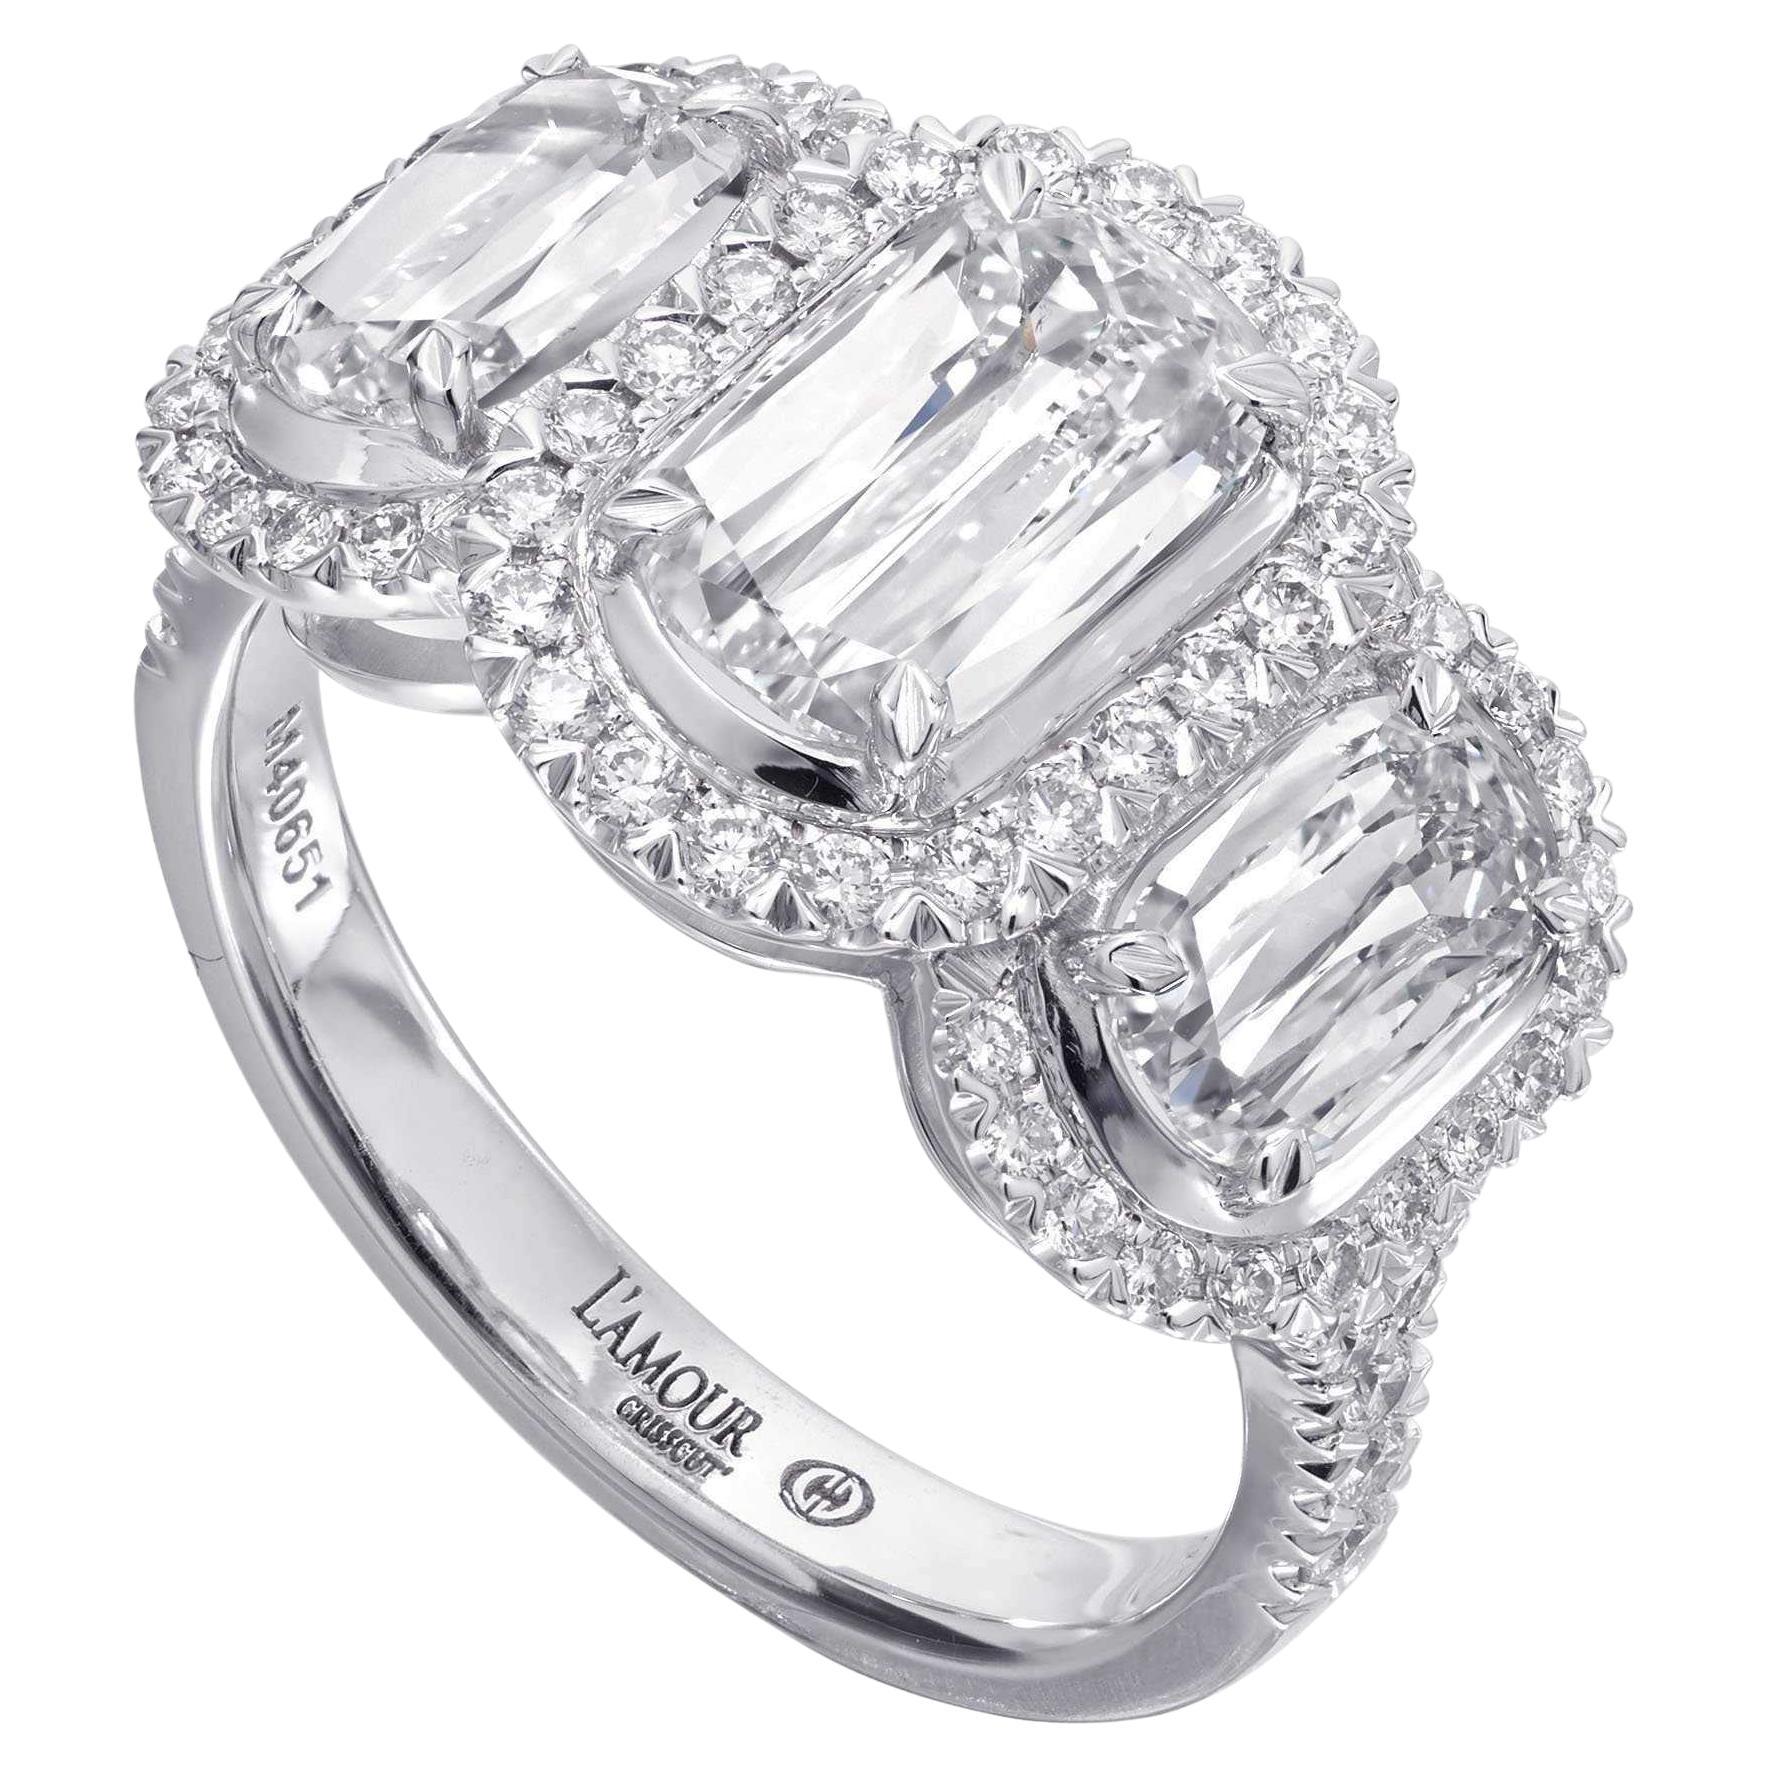 Christopher Designs L'Amour Crisscut 3 Diamond Halo Ring Set in 18K White Gold For Sale